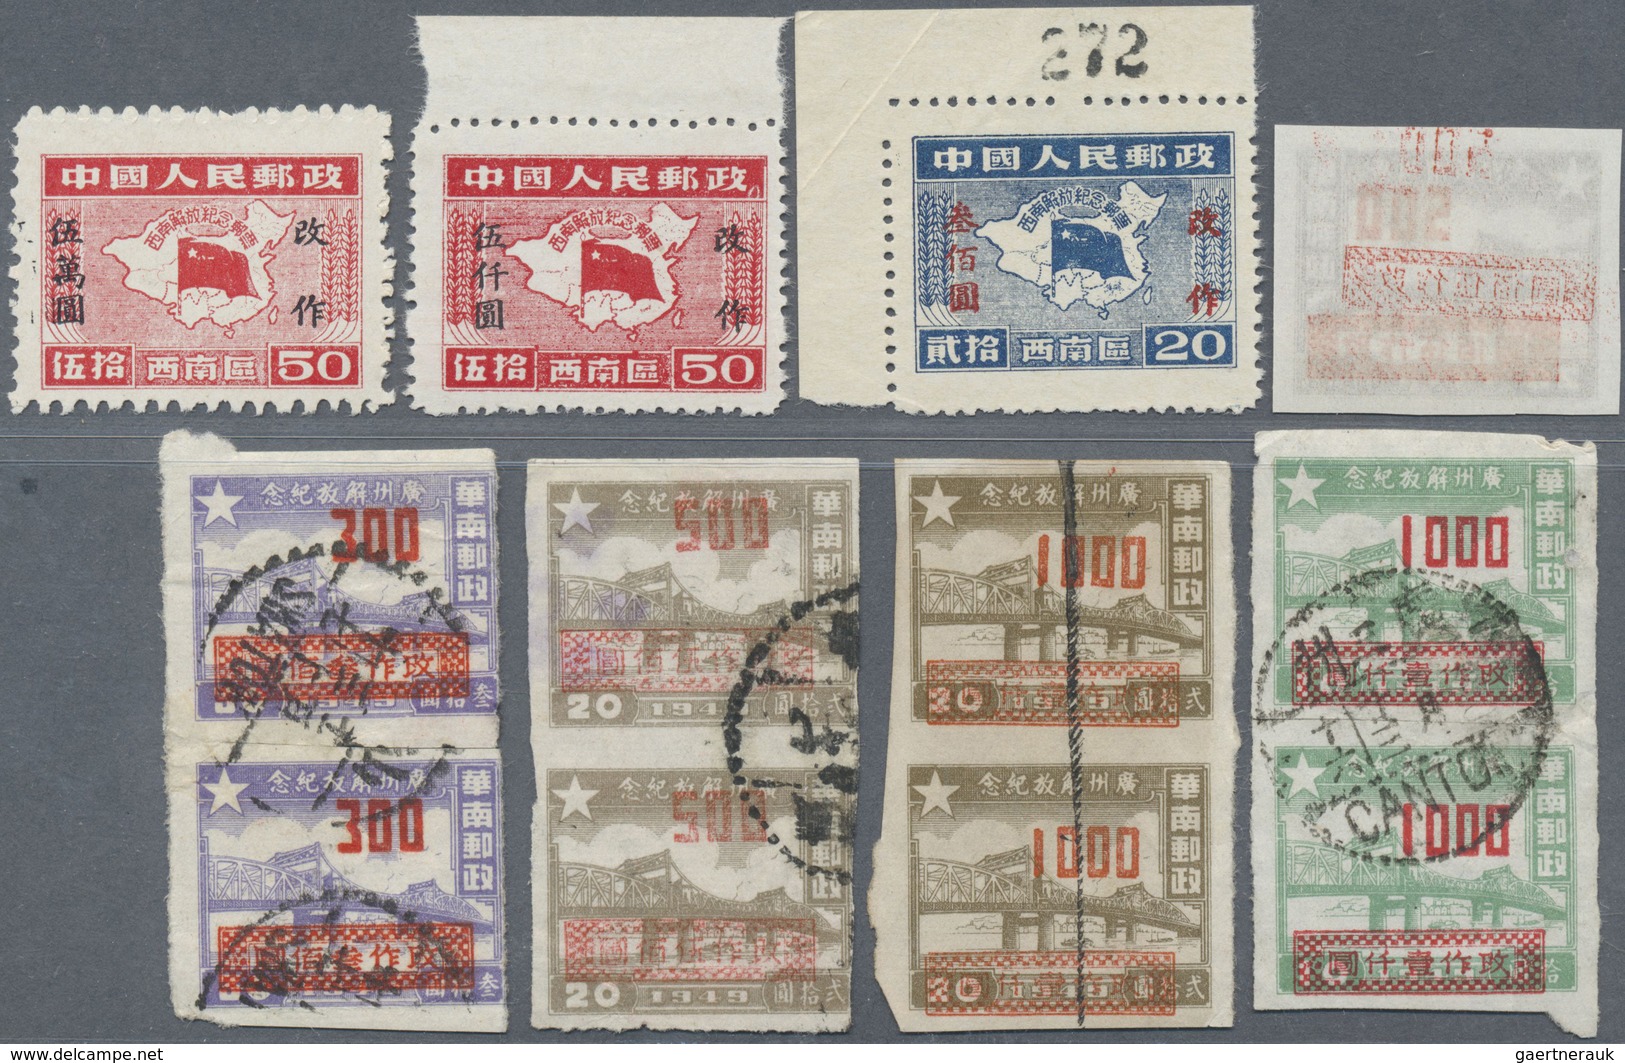 (*)/O/ China - Volksrepublik - Provinzen: Southwest China, South China and related, 1949/50, mint and used